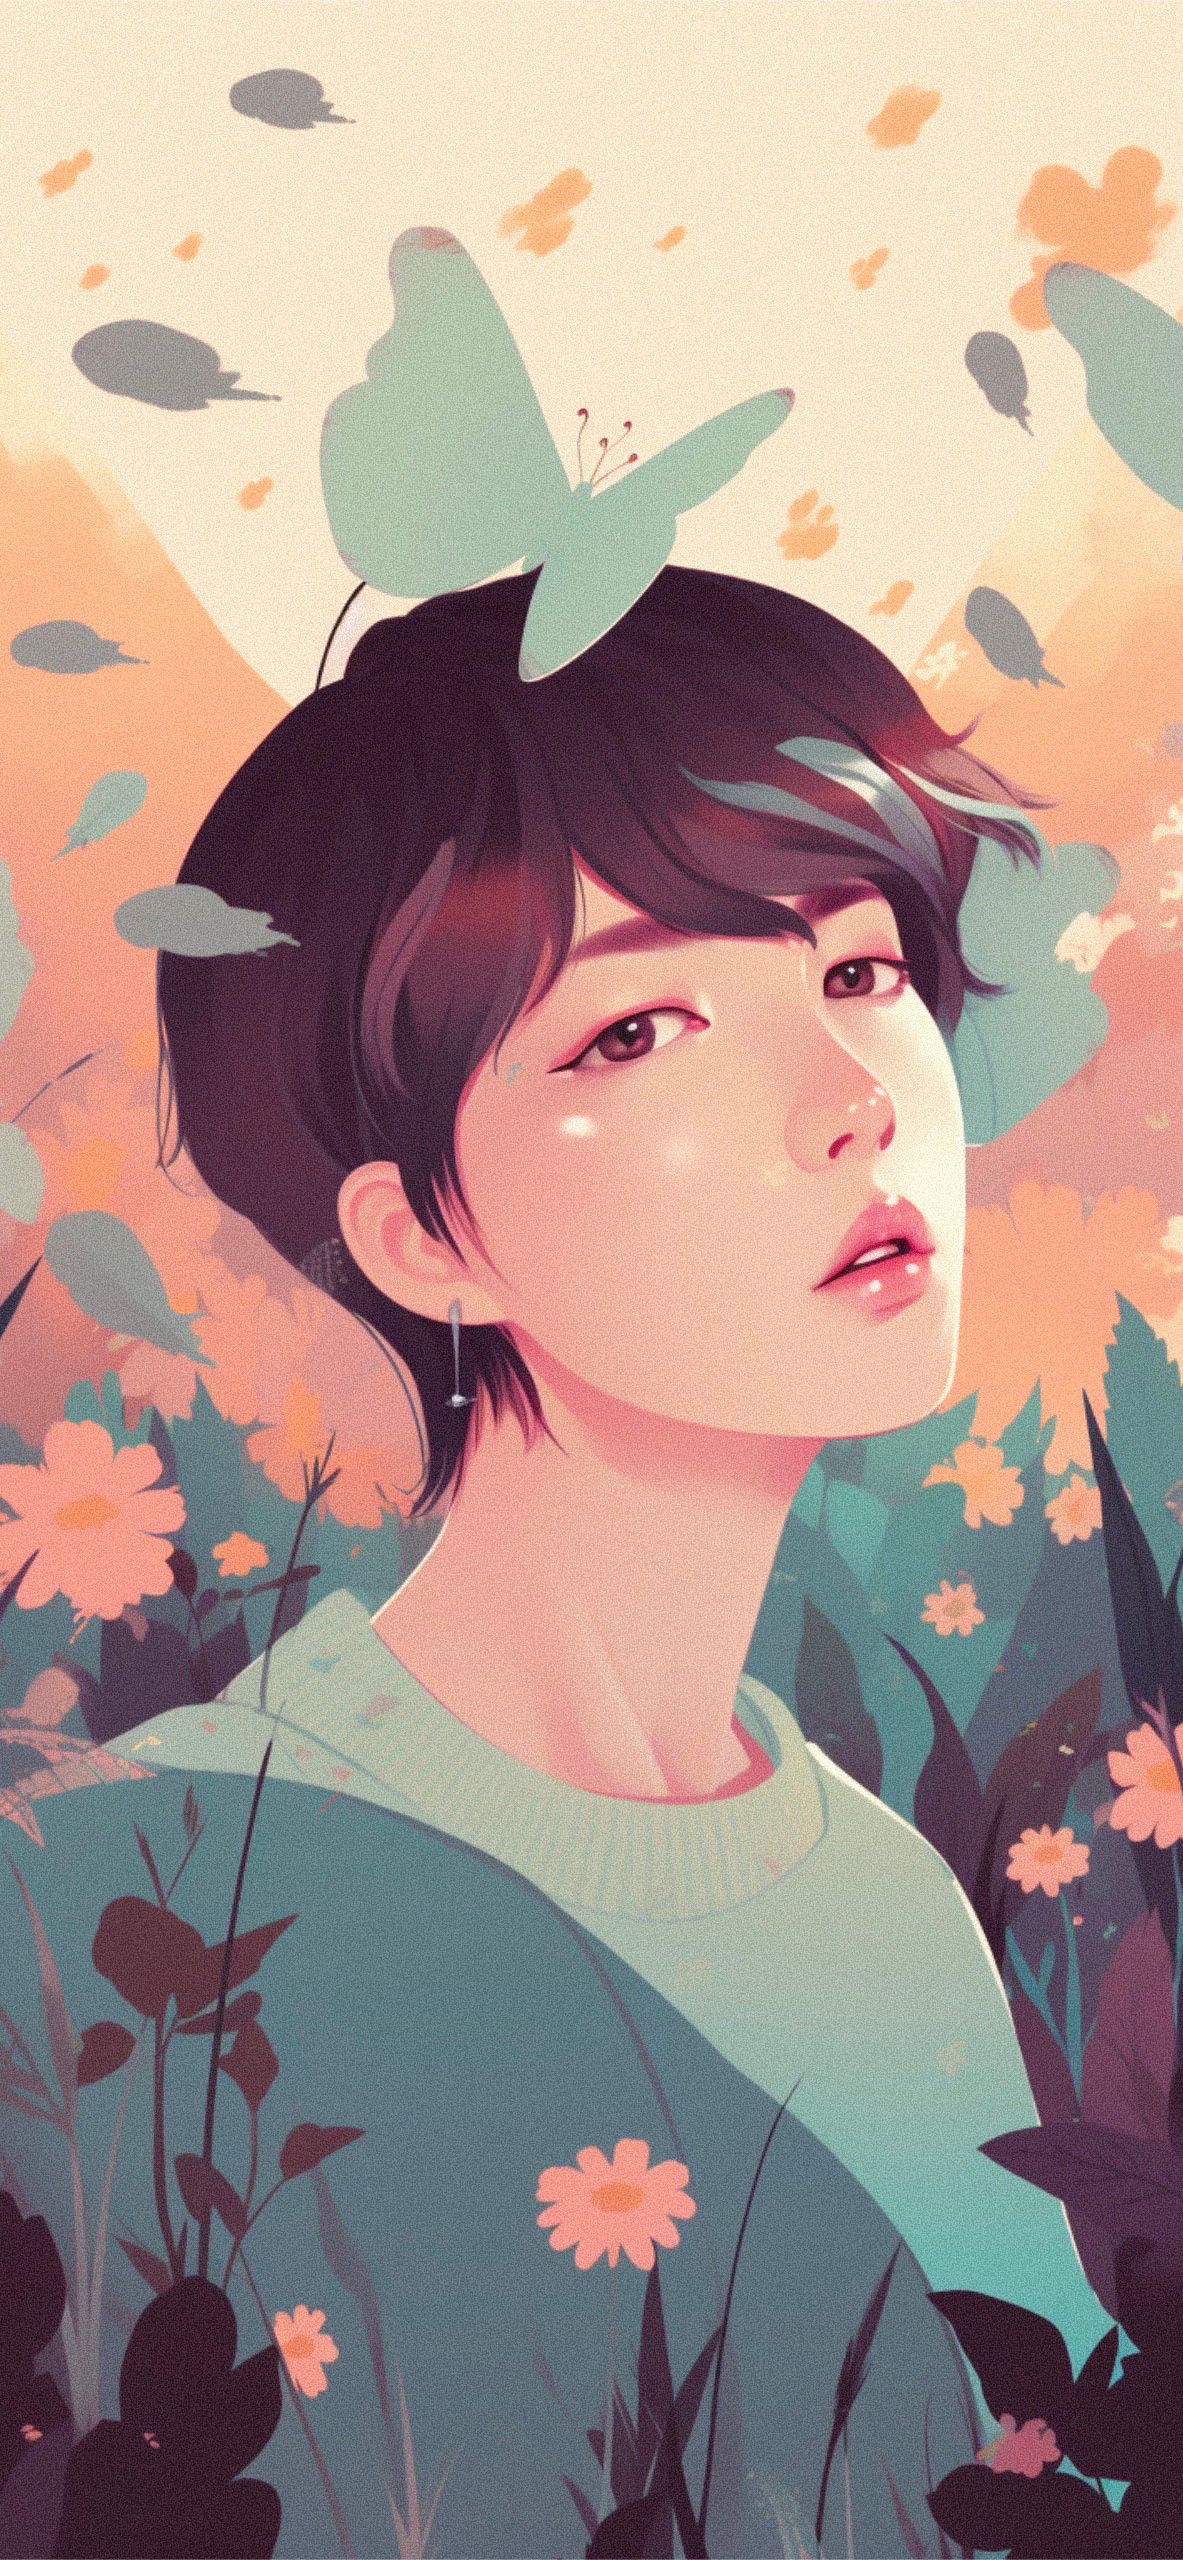 A girl with butterflies on her head - Illustration, Jungkook, BTS